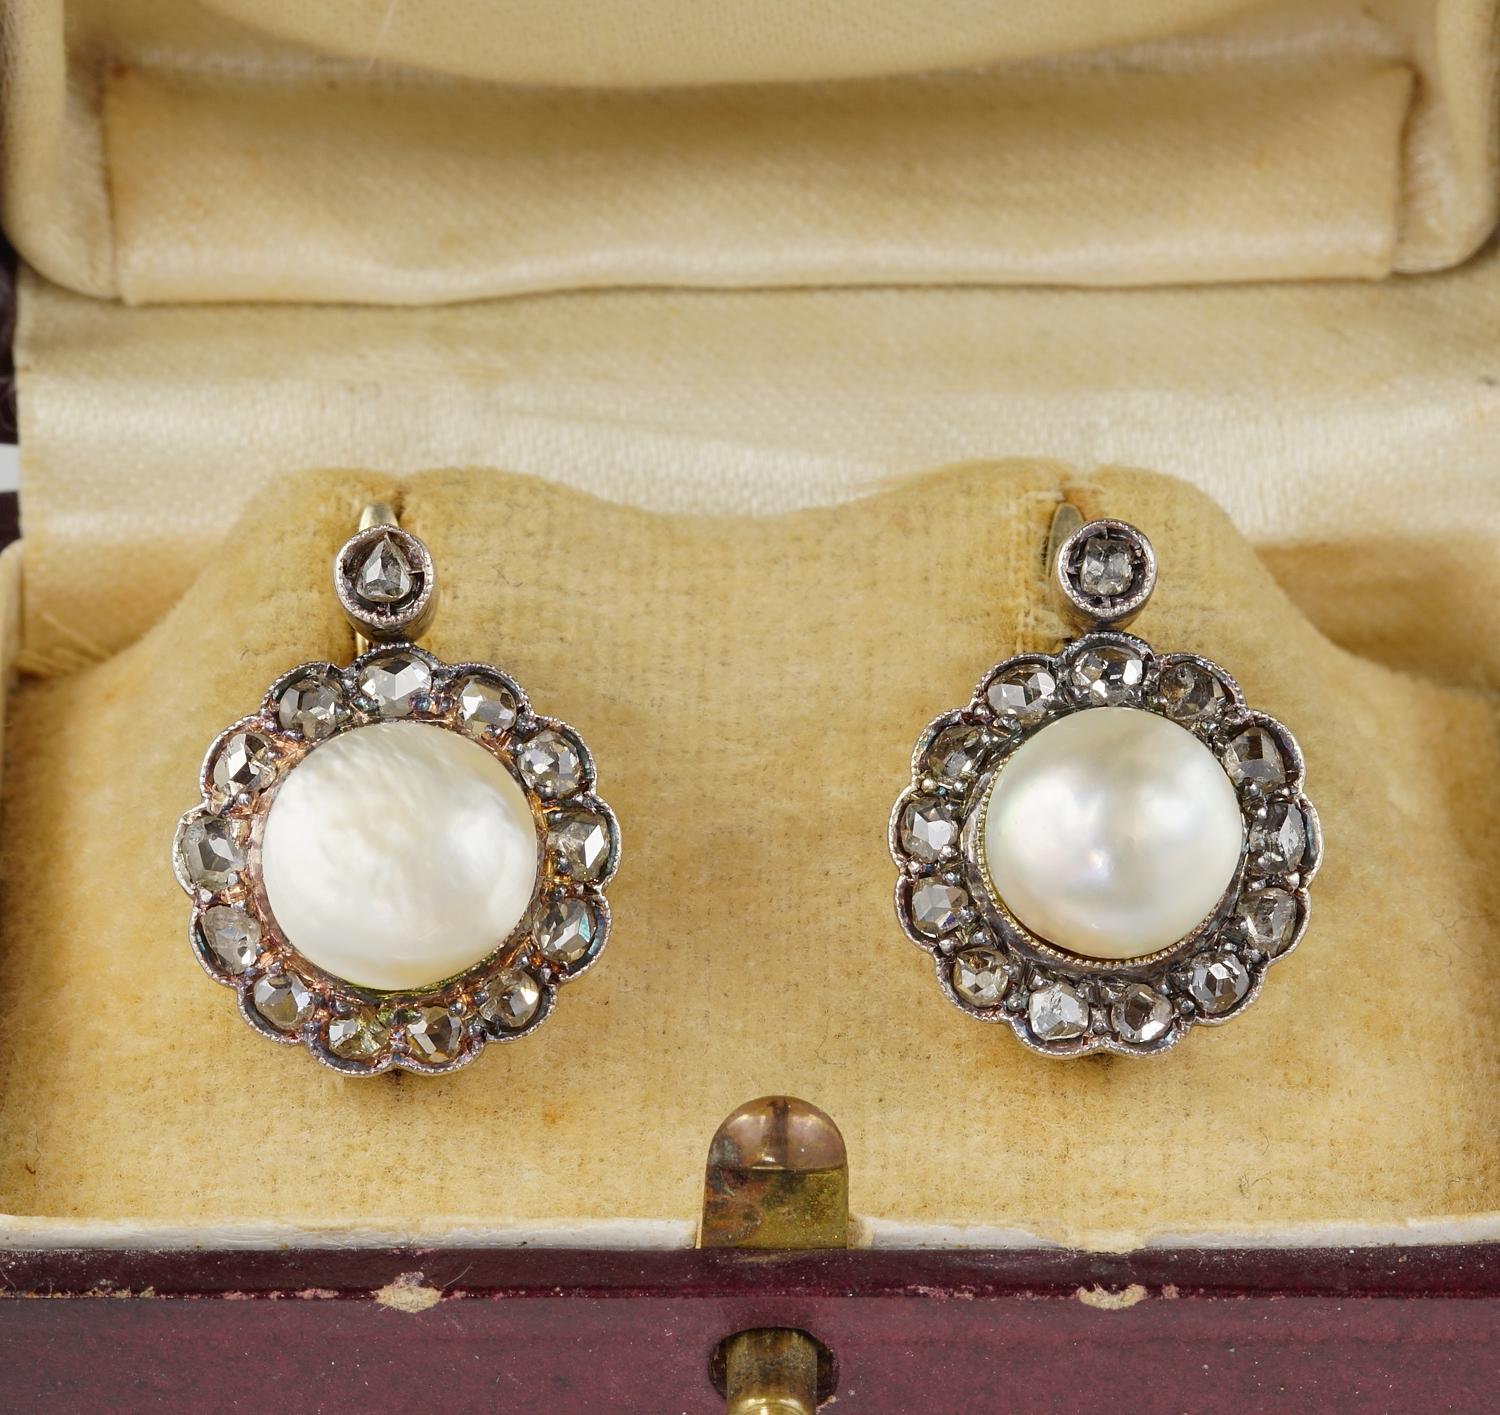 1870 ca!

Rare and marvellous pair of original Victorian Natural Pearl and Diamond earrings.
Classy design of the period skilfully hand crafted of solid 16 Kt gold and silver portions - not marked
Boasting two Natural not nucleated sea Pearls from